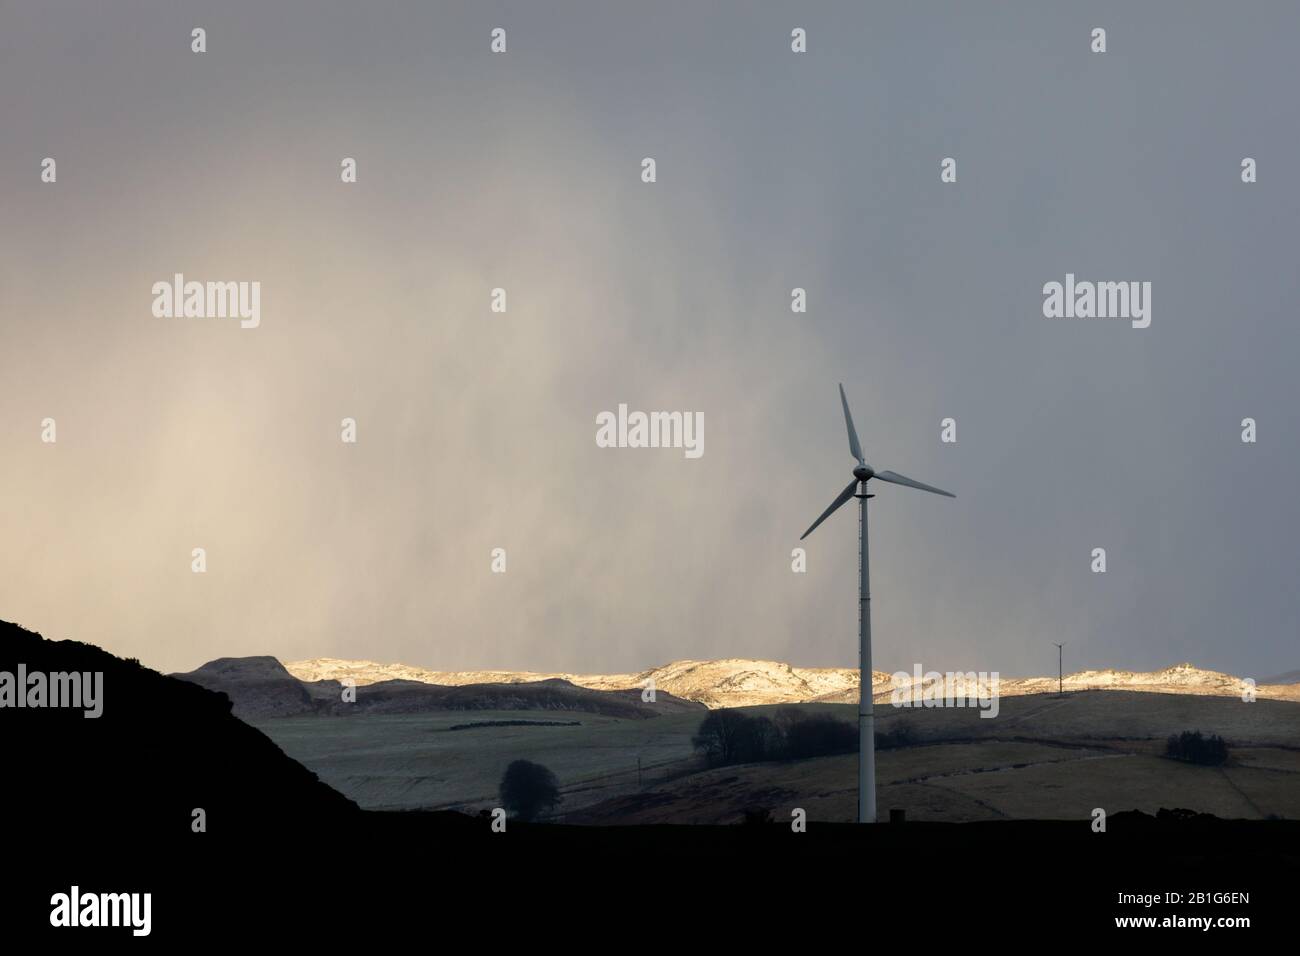 Near Tynygraig, Ceredigion, Wales, UK. 25th February 2020  UK Weather: A cold, breezy afternoon near Tynygraig in Ceredigion, as a small band of light breaks through the cloud, highlighting the snow forming on the Cambrian Mountains in Mid Wales this afternoon. © Ian Jones/Alamy Live News Stock Photo